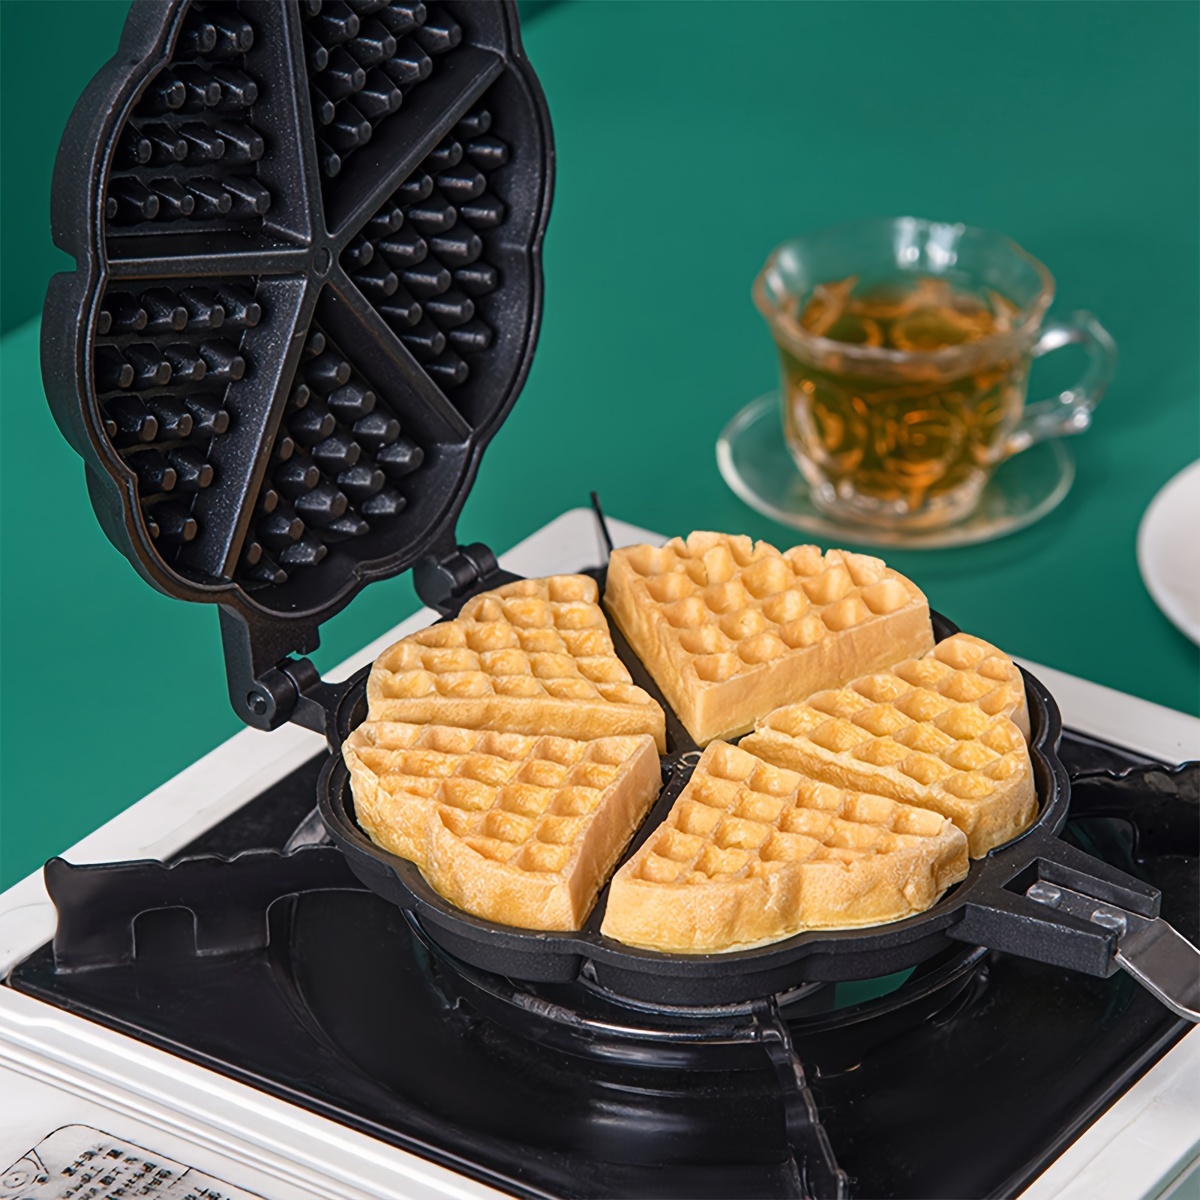 

love Breakfast" 1pc Heart-shaped Waffle Maker - Non-stick, Easy Clean Cast Iron Pan For Breakfast Pancakes & Snacks